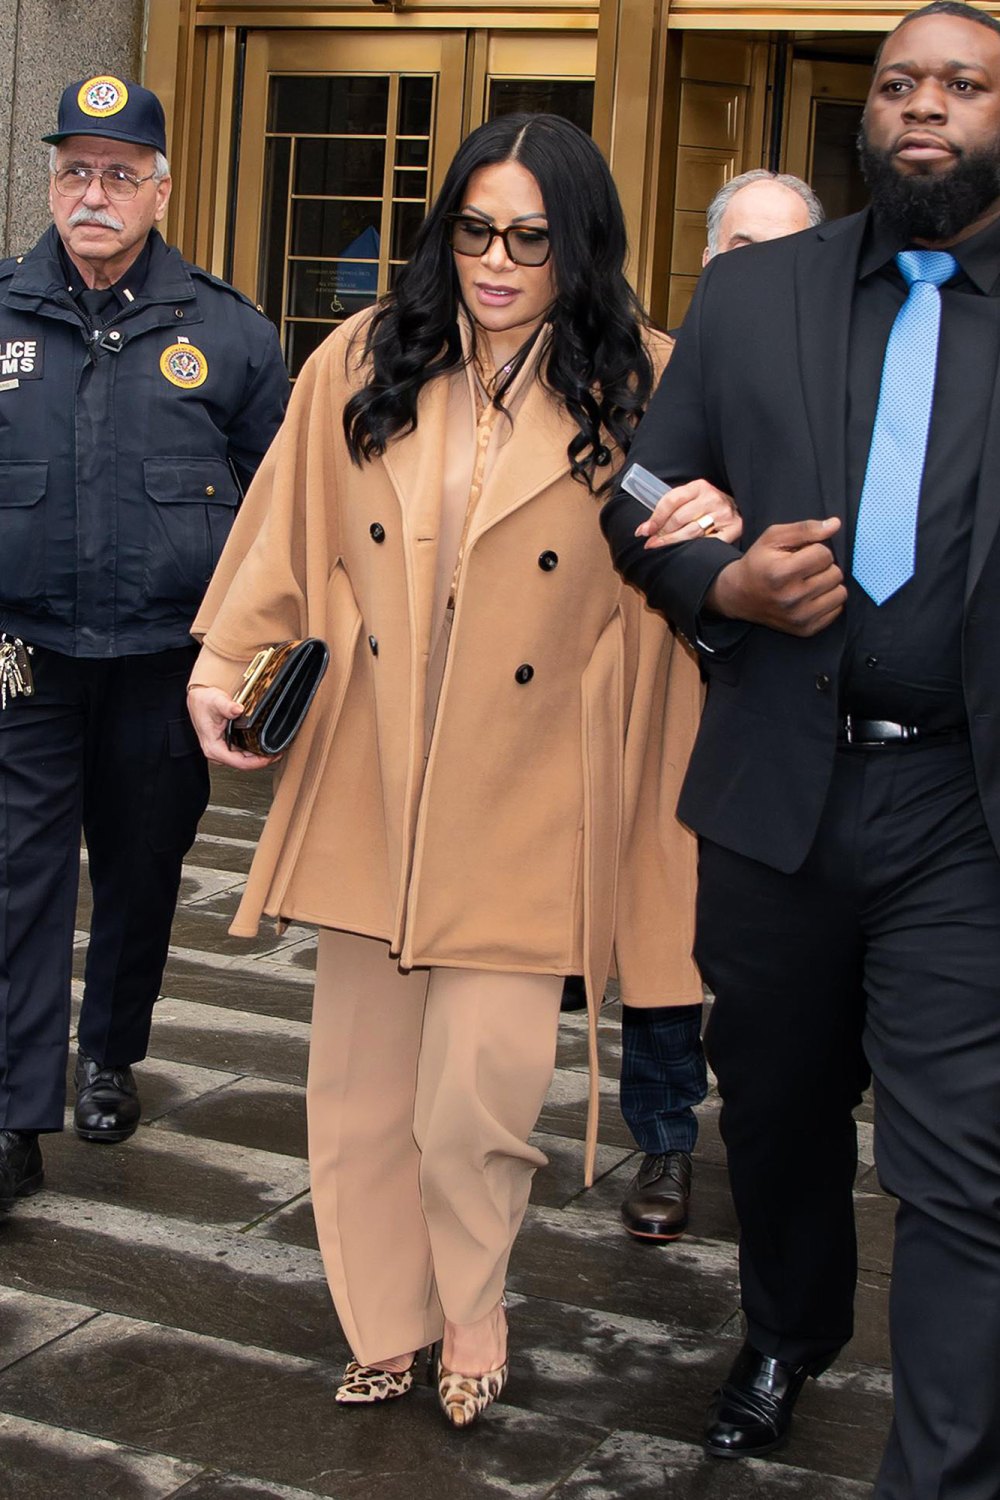 Real Housewives of Salt Lake City’s Jen Shah Surrenders to Begin 6.5 Year Prison Sentence -046 Jen Shah Exits Federal Courthouse After Receiving 6.5 Year Prison Sentence